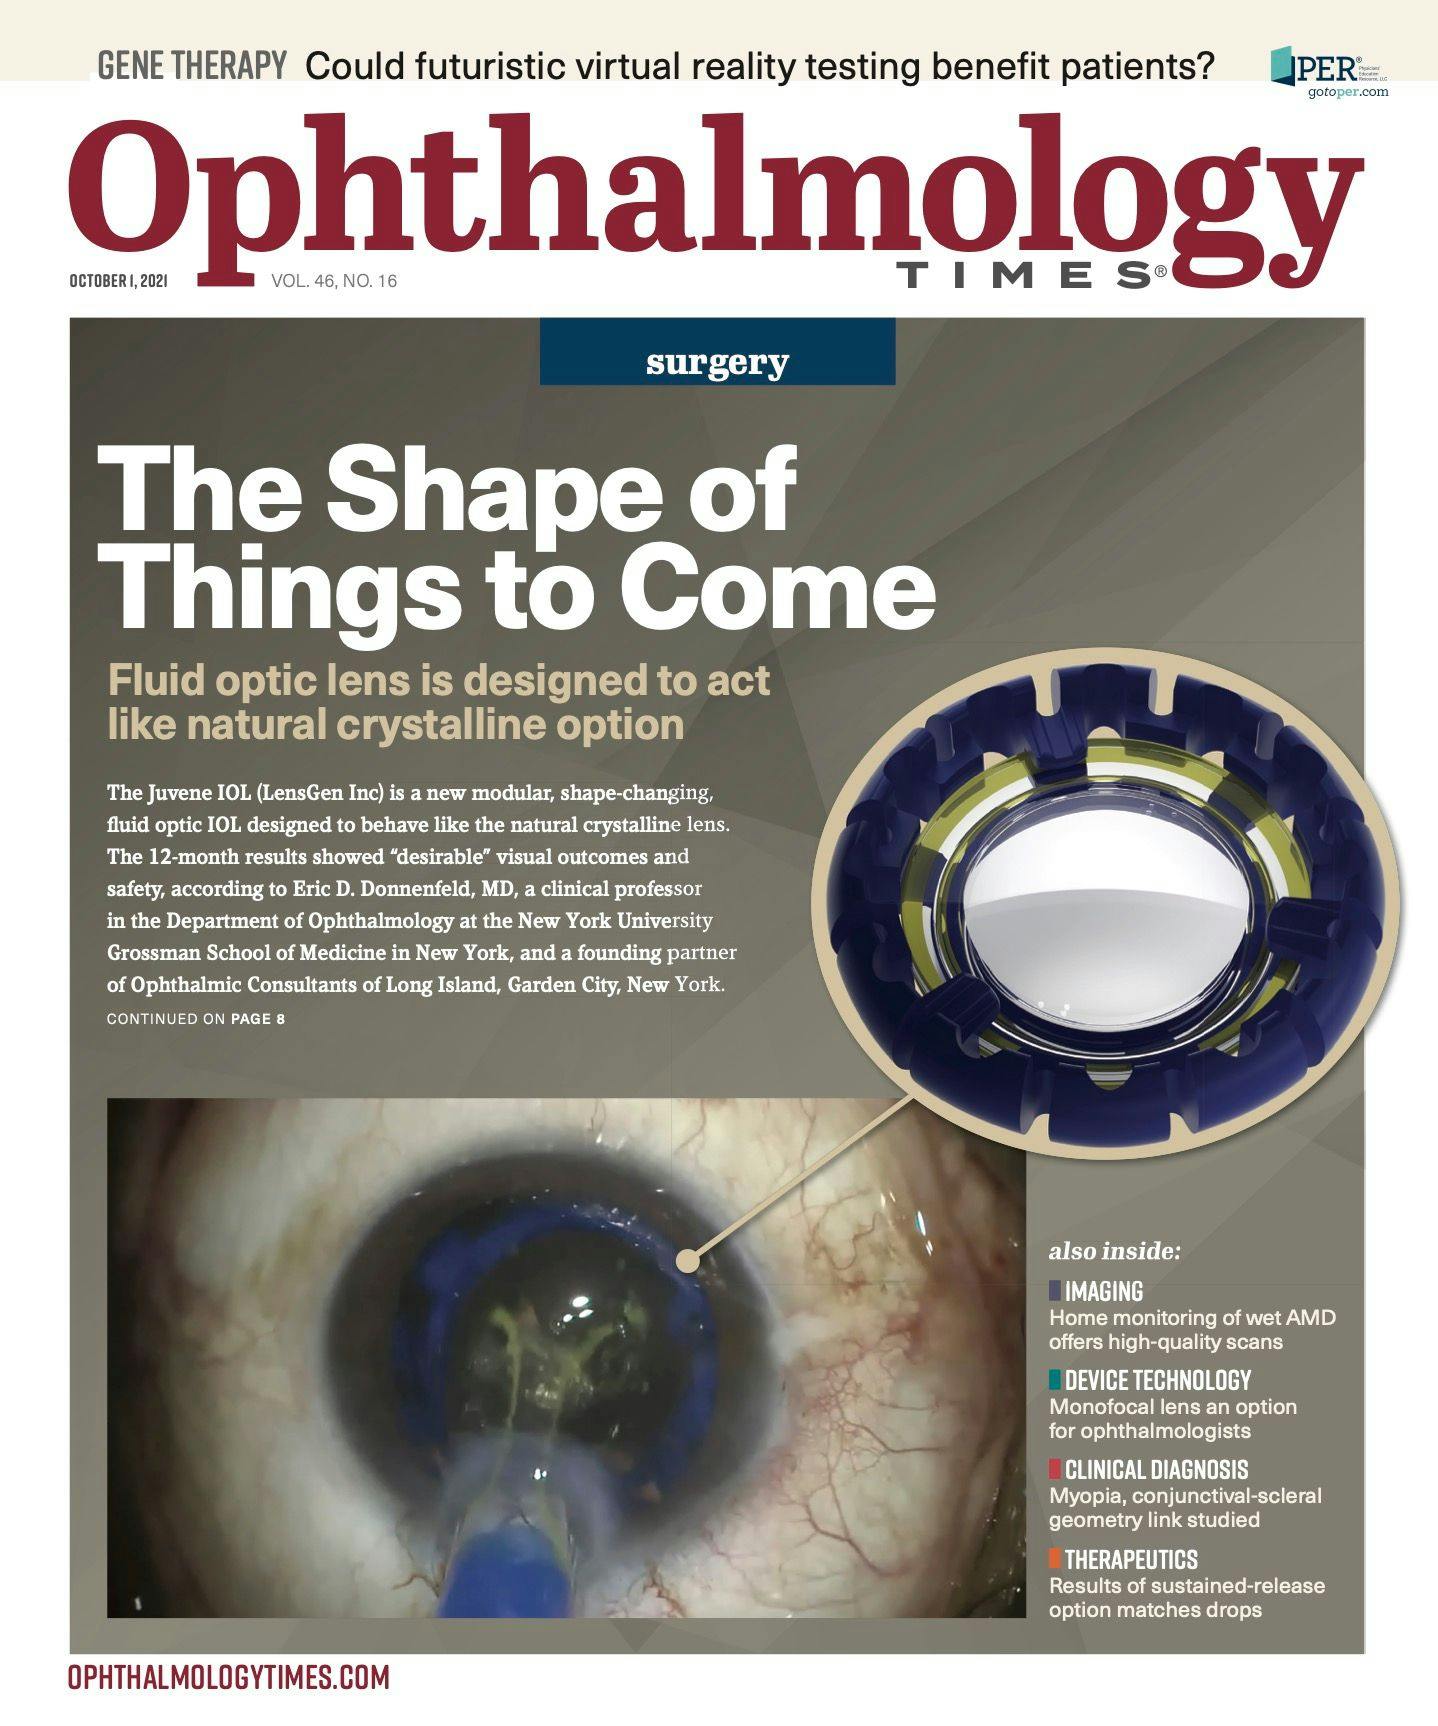 Ophthalmology Times: October 1, 2021